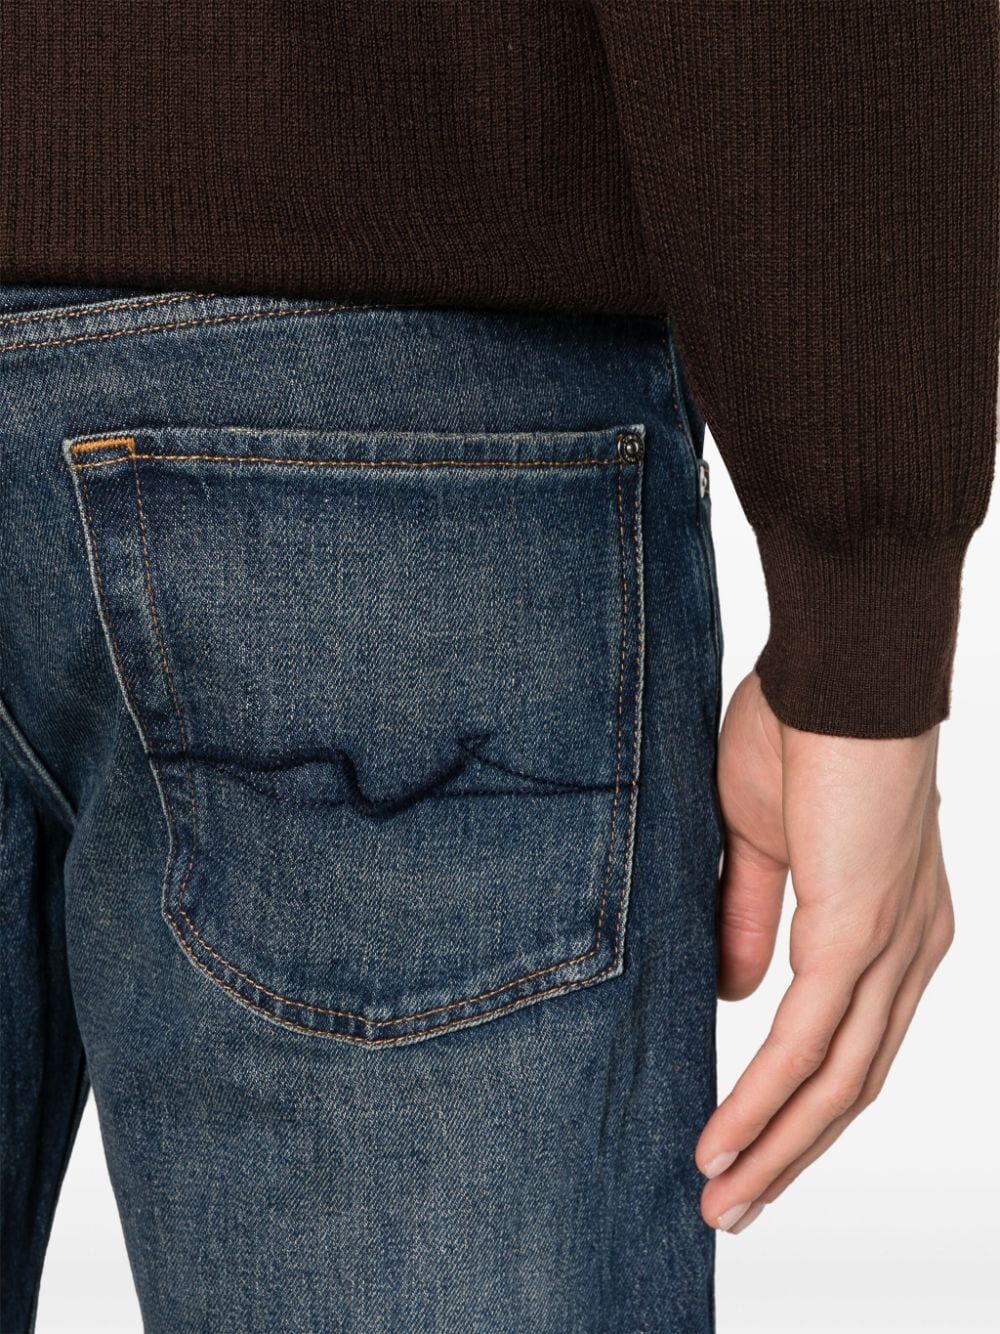 The Straight Upgrade Jeans